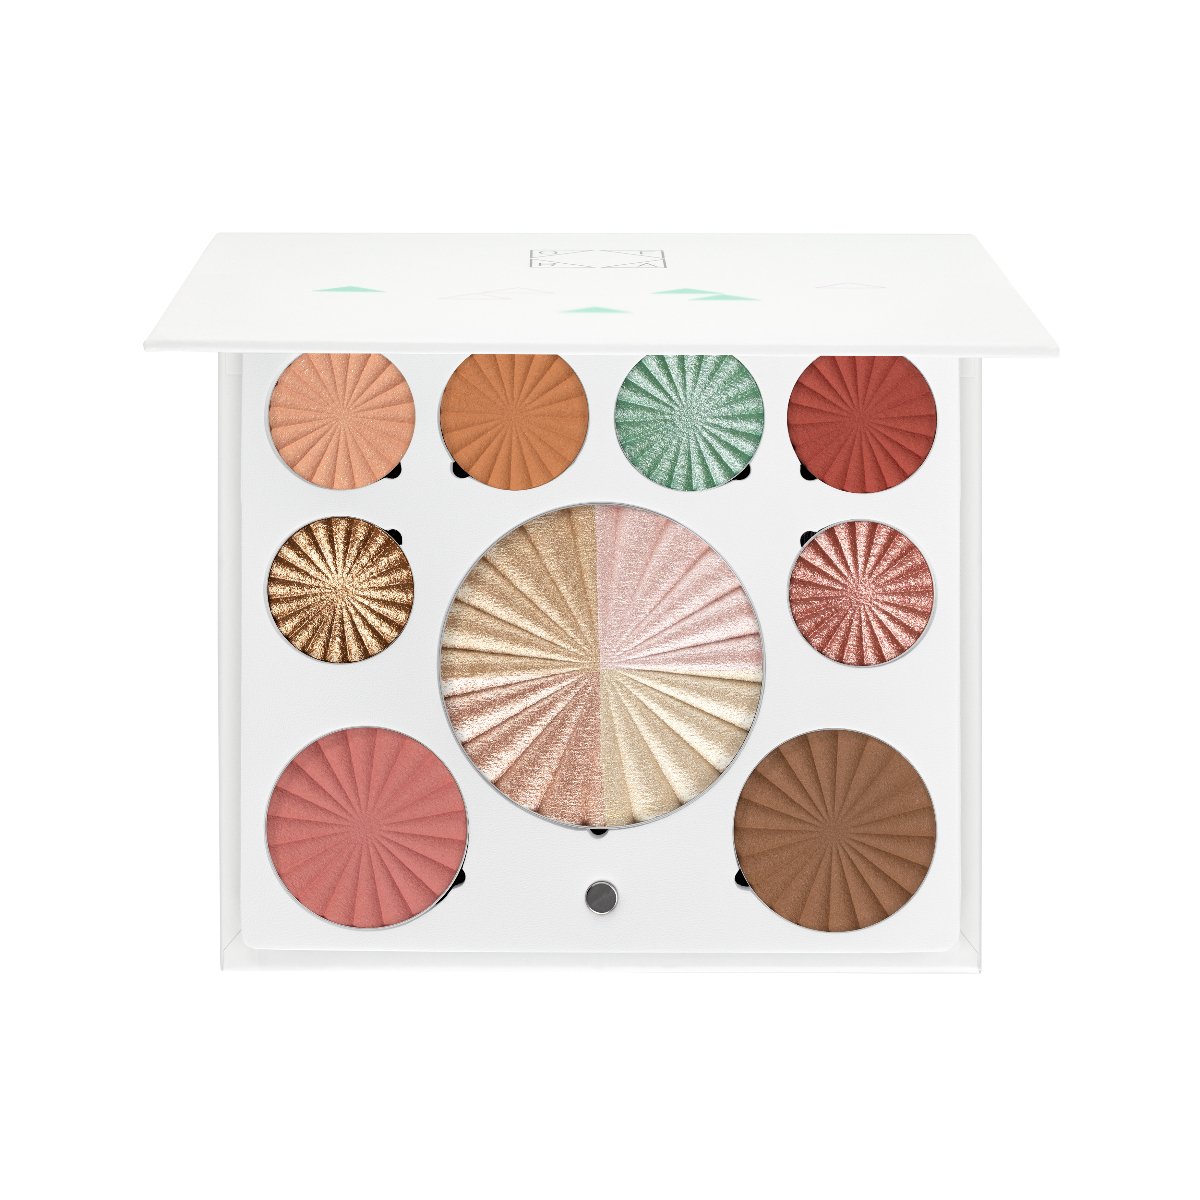 Ofra Cosmetics Good To Go Mini Mix Full - Face Palette - AllurebeautypkOfra Cosmetics Good To Go Mini Mix Full - Face Palette